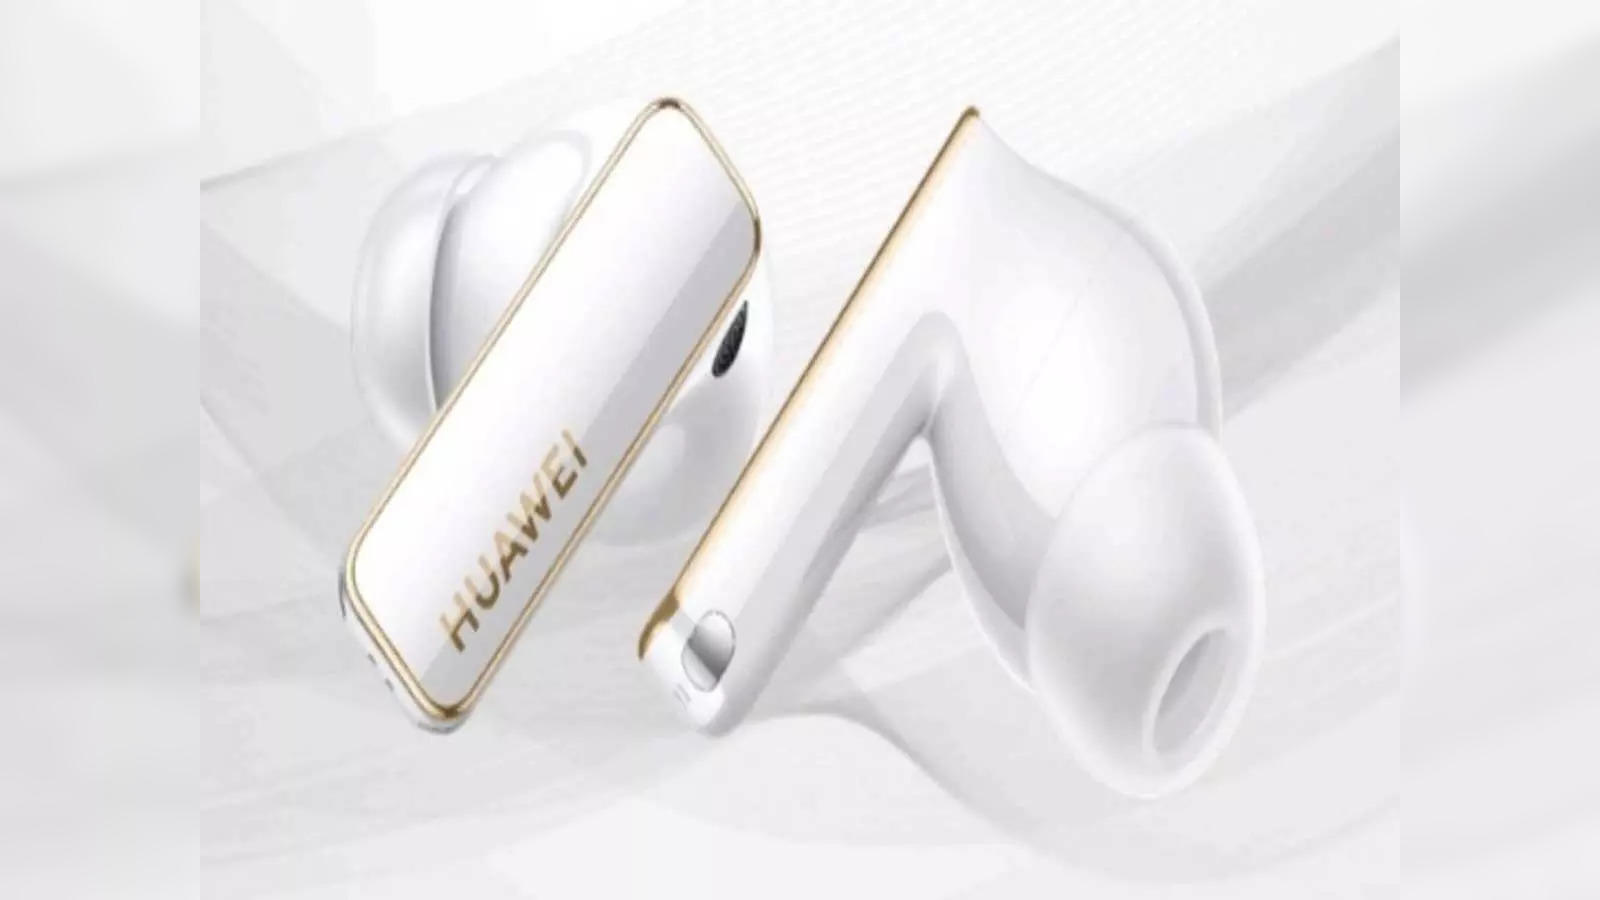 huawei freebuds pro price: Huawei FreeBuds Pro 2+, Huawei TalkBand B7 and Huawei  FreeBuds 5 launched; Check price, specifications and more - The Economic  Times